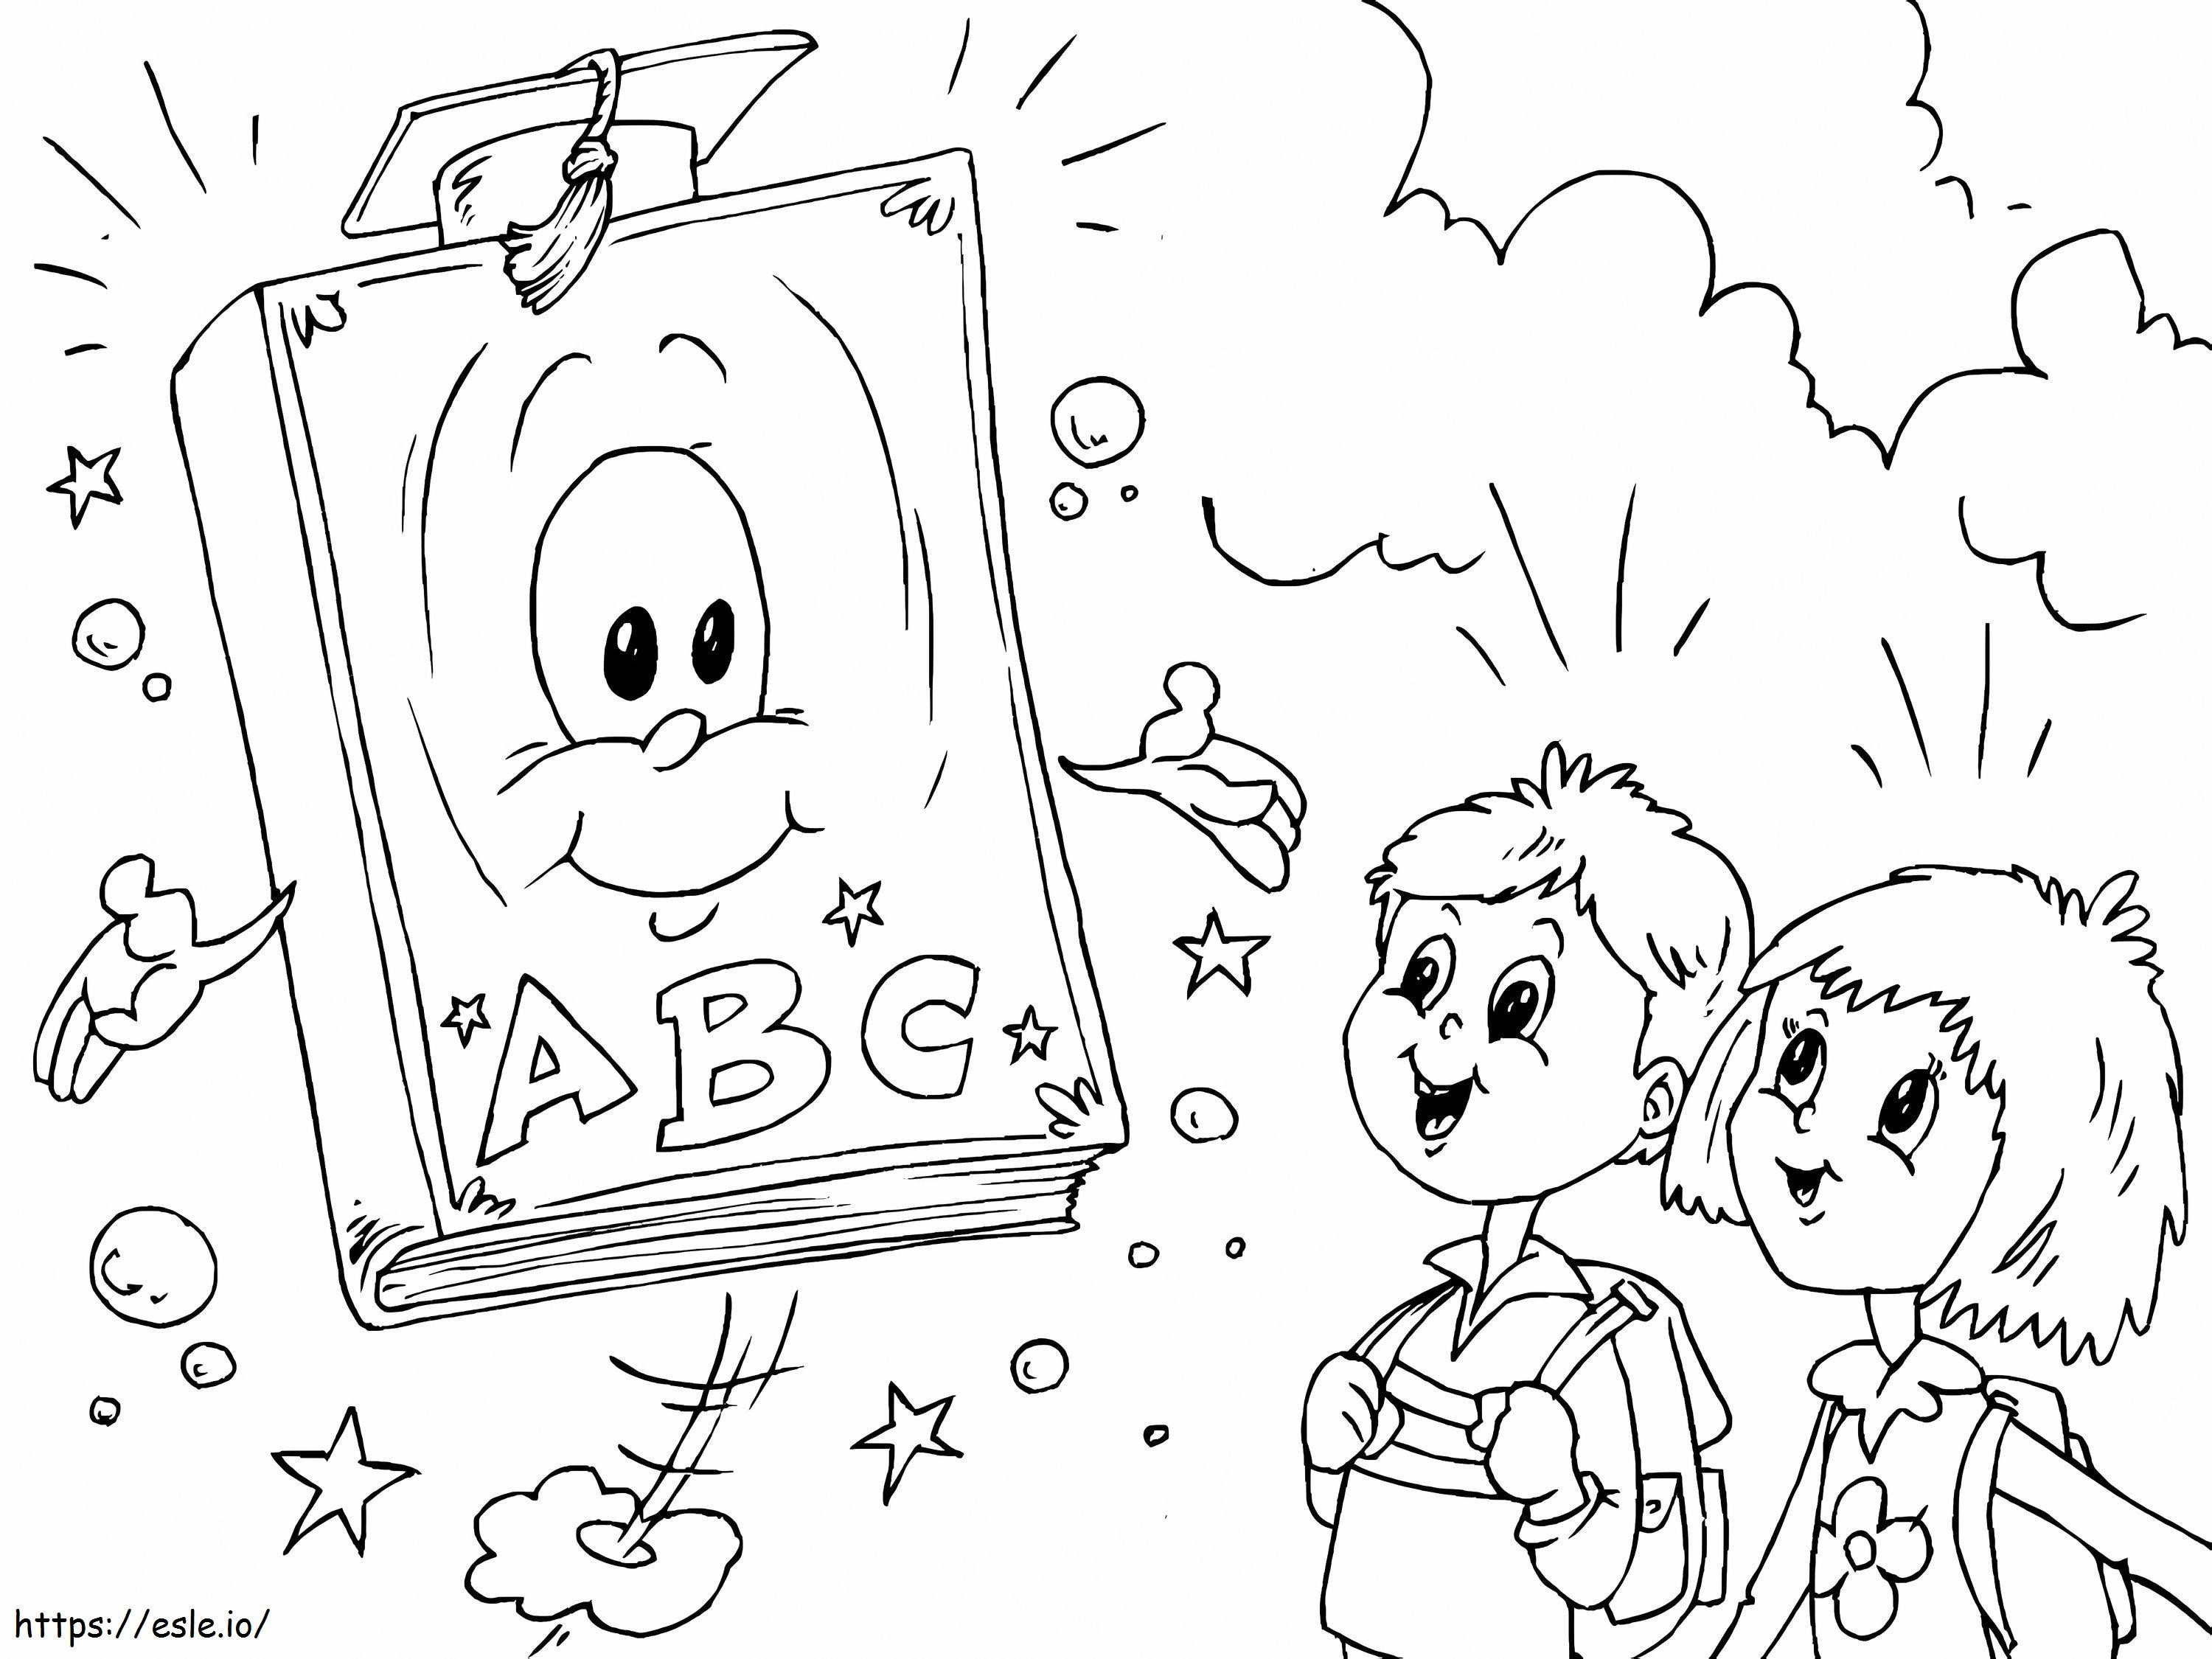 1528683072 Bookteachinga4 coloring page